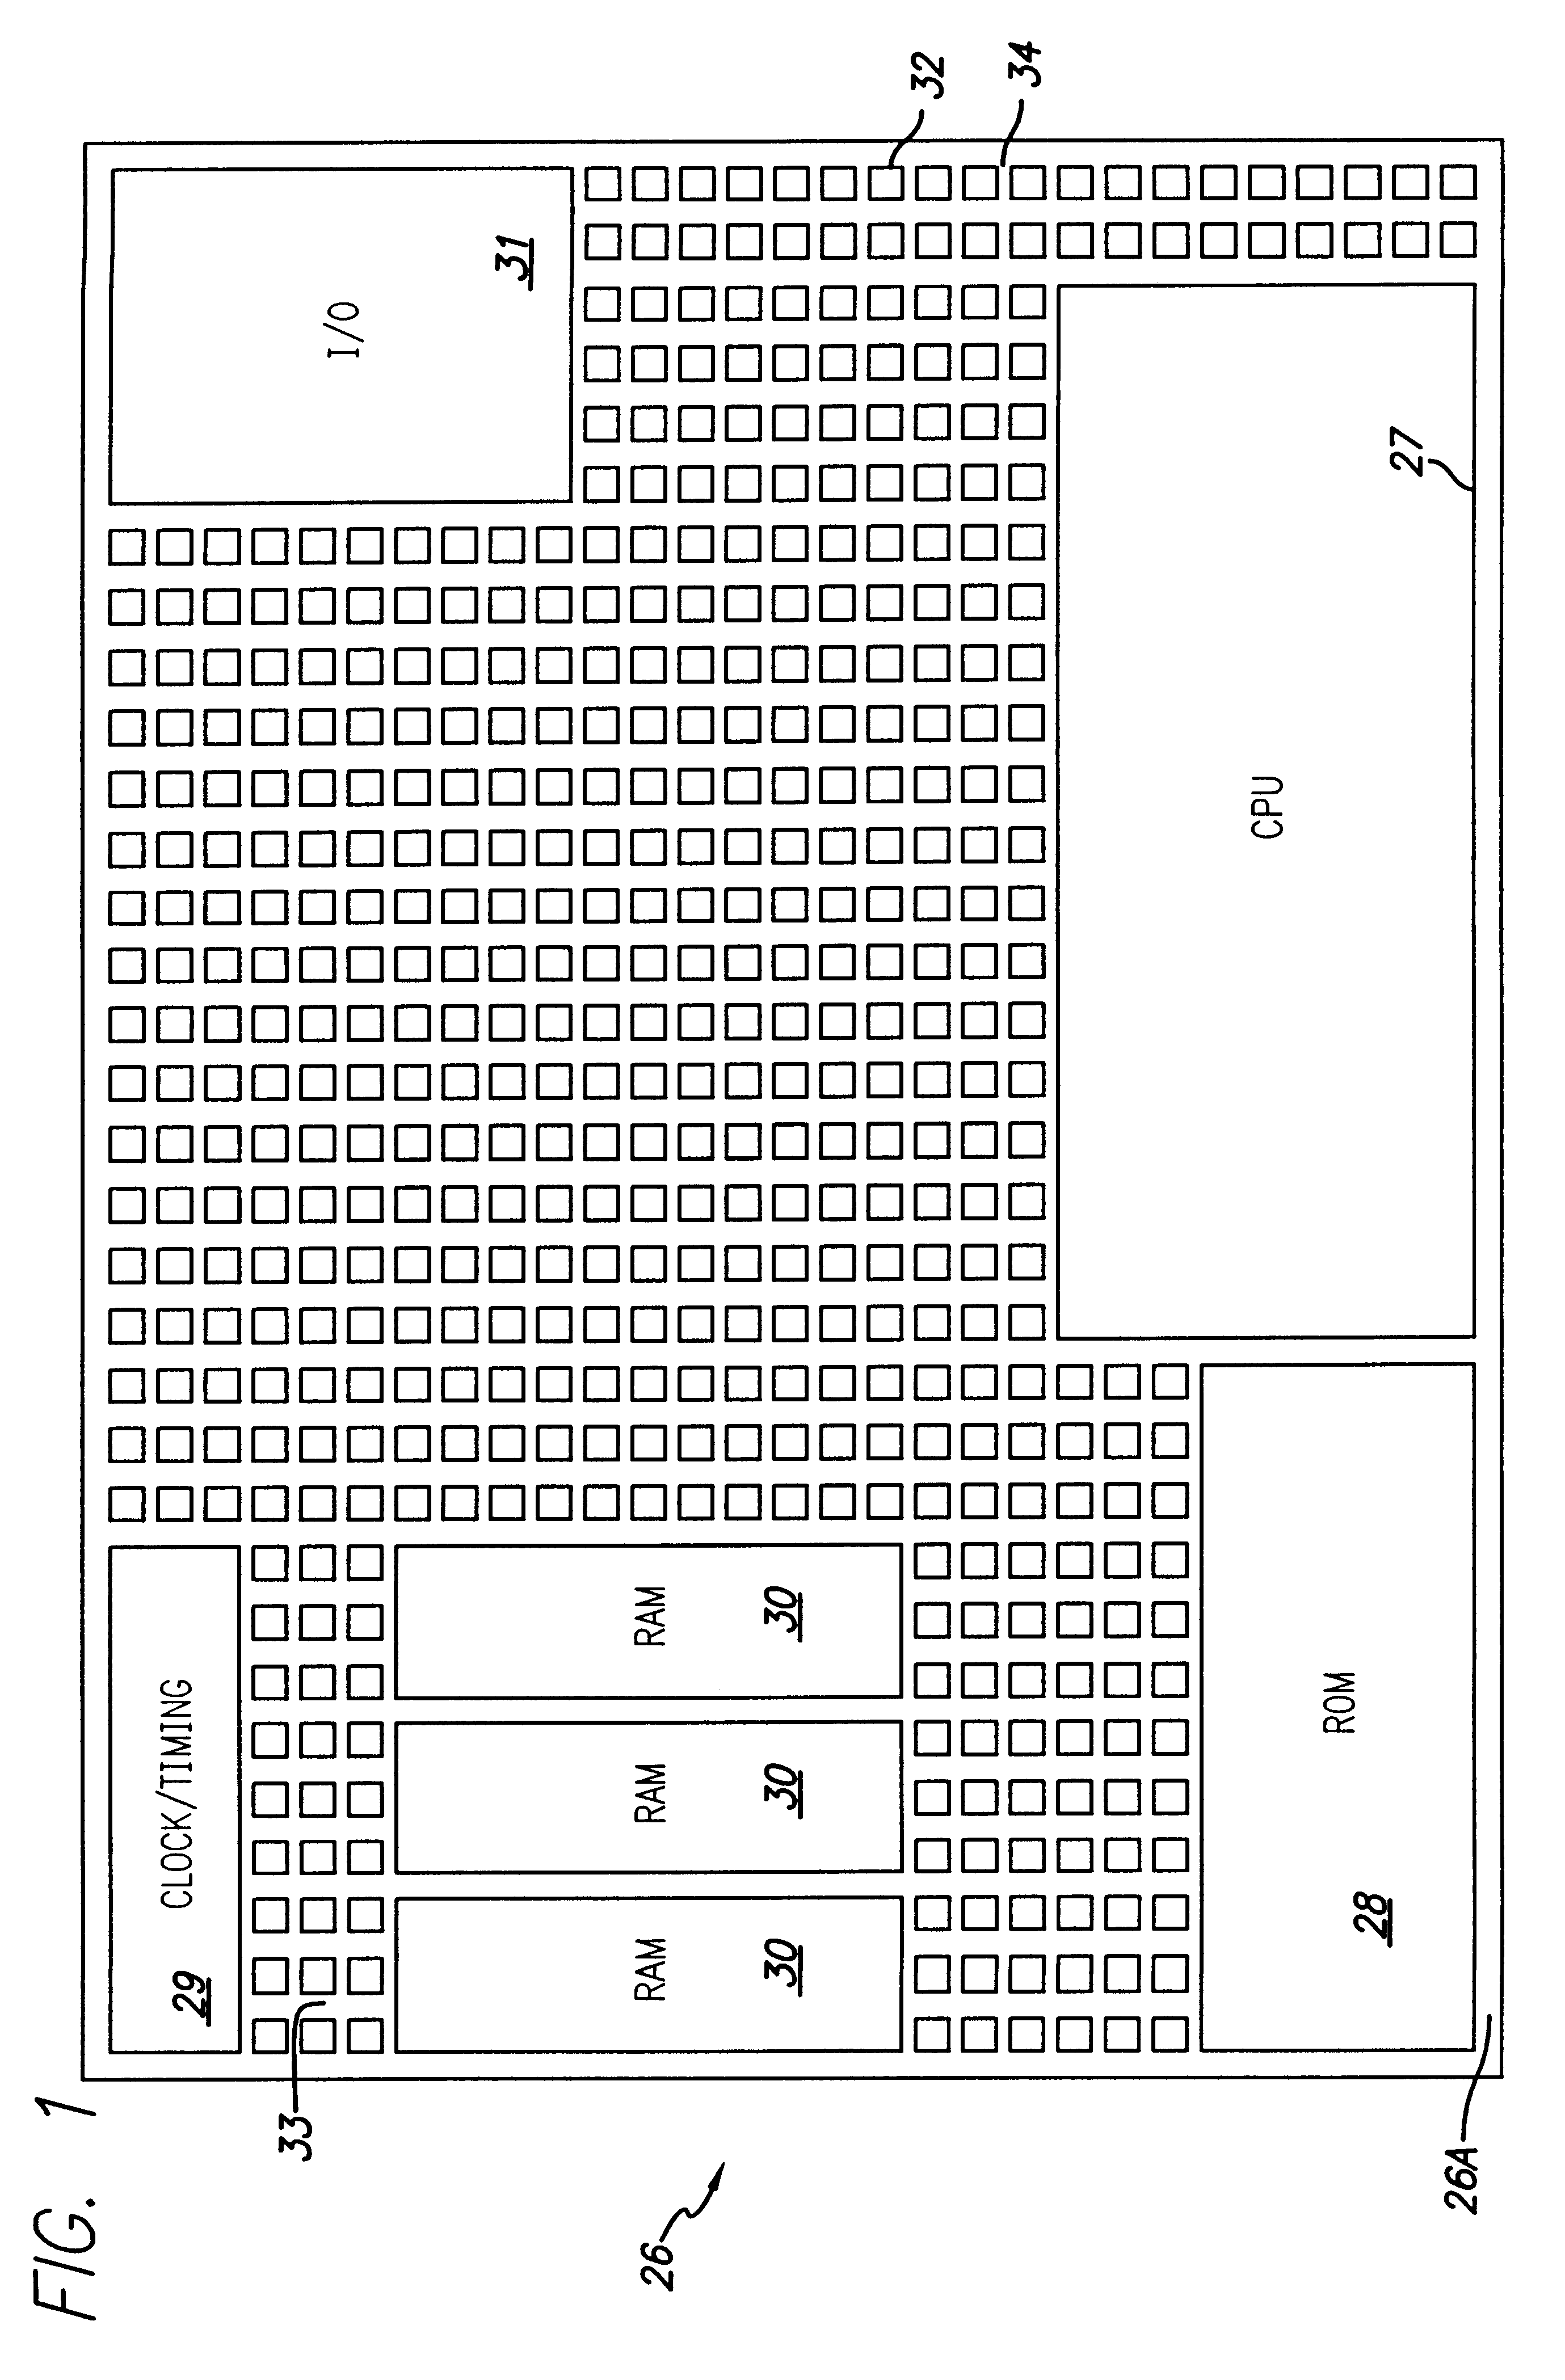 Method and apparatus for hierarchical global routing descend